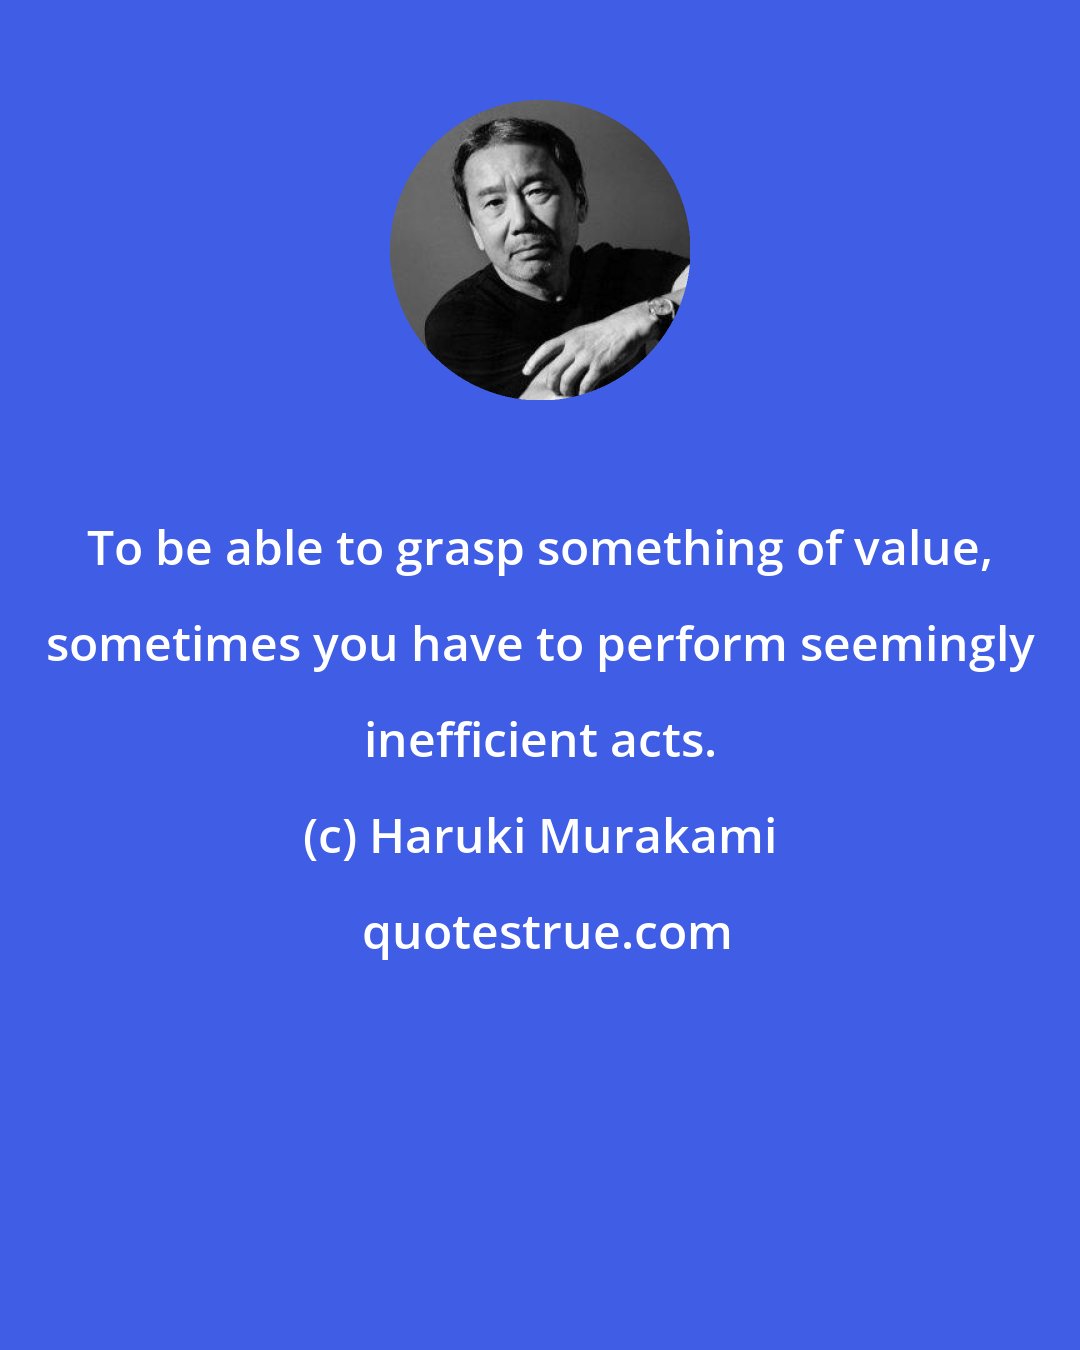 Haruki Murakami: To be able to grasp something of value, sometimes you have to perform seemingly inefficient acts.